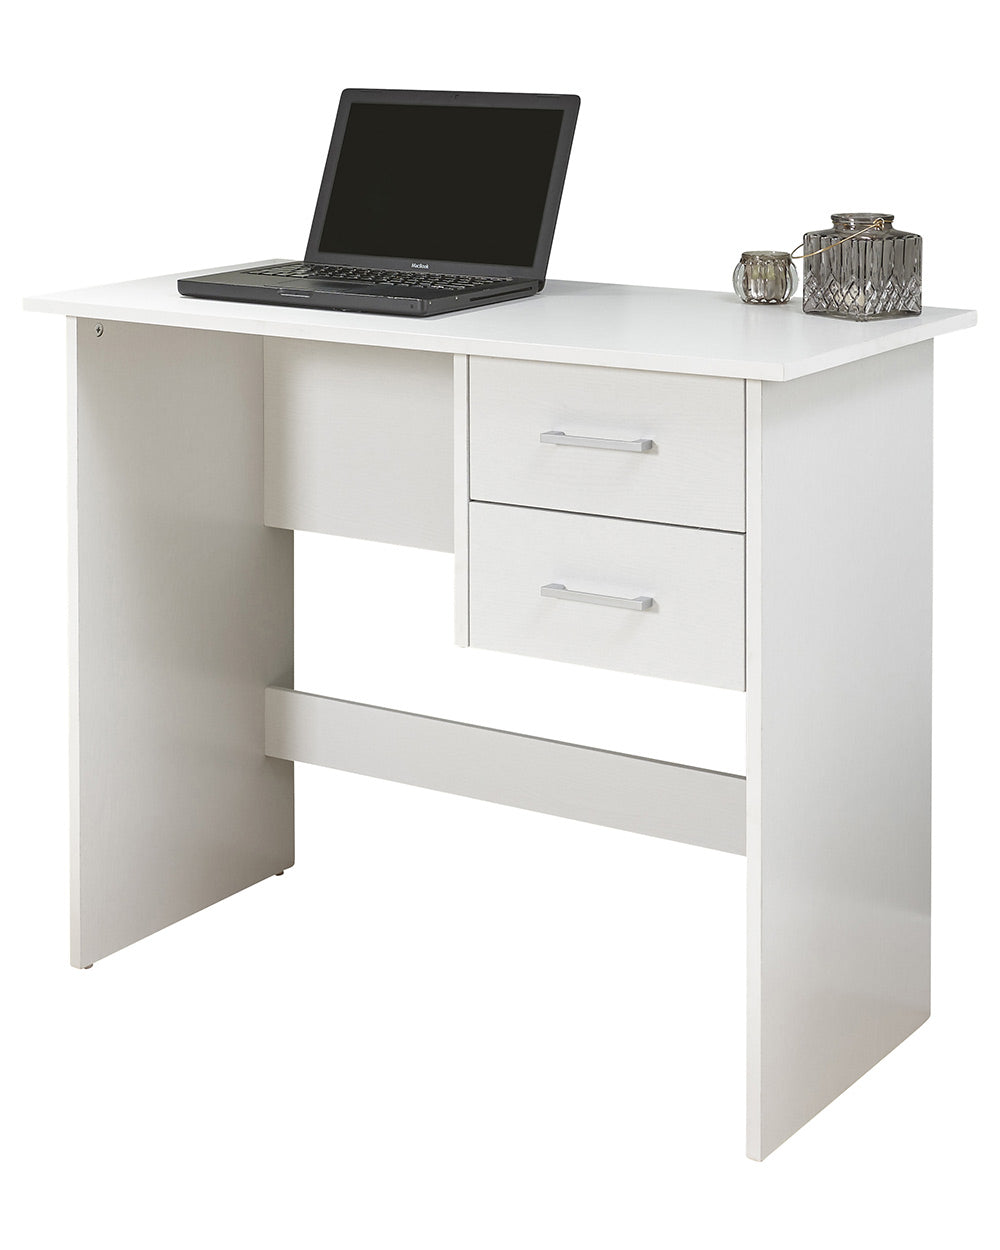 Panama desk featured on a white cut out background